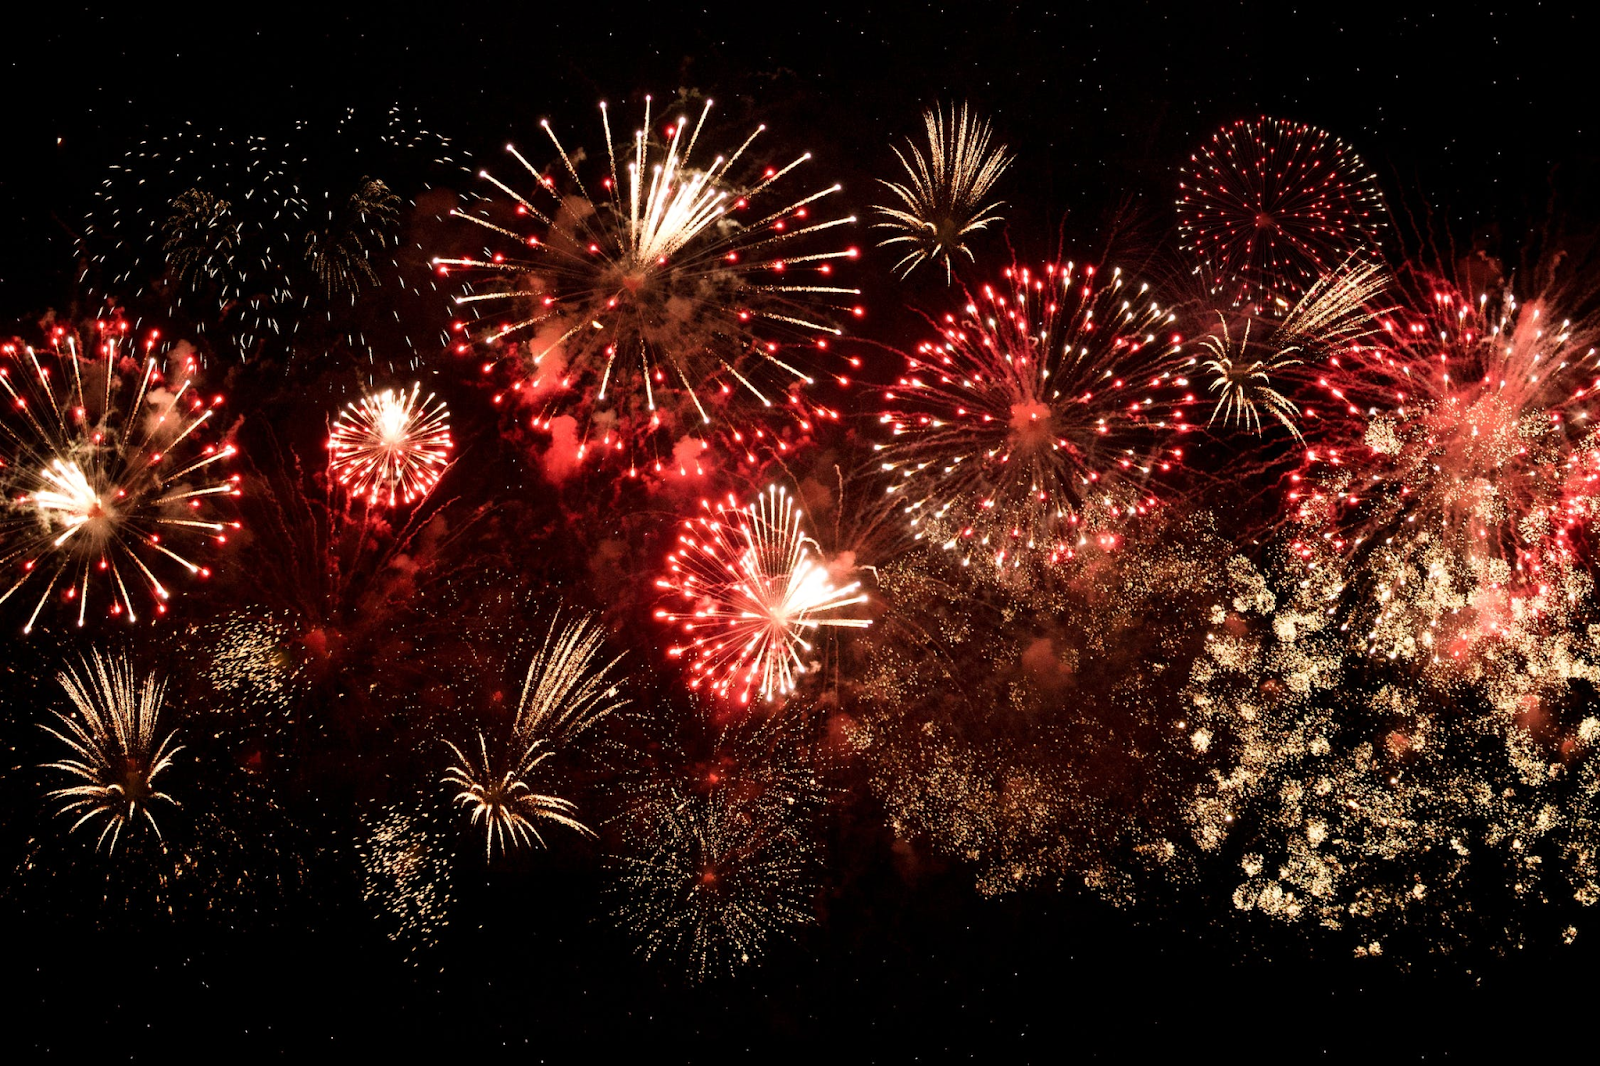 Celebrating new year with fireworks.